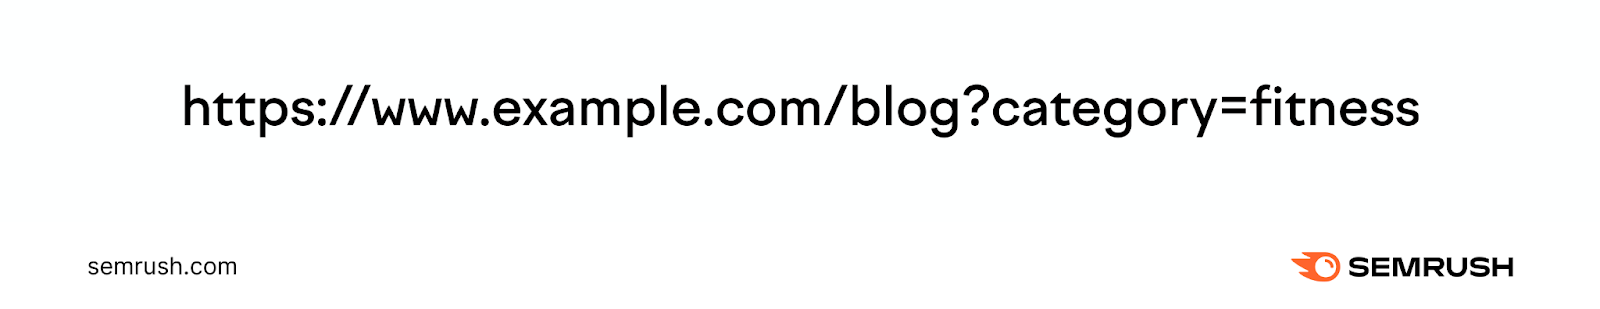 An URL that reads: "https://www.example.com/blog?category=fitness"